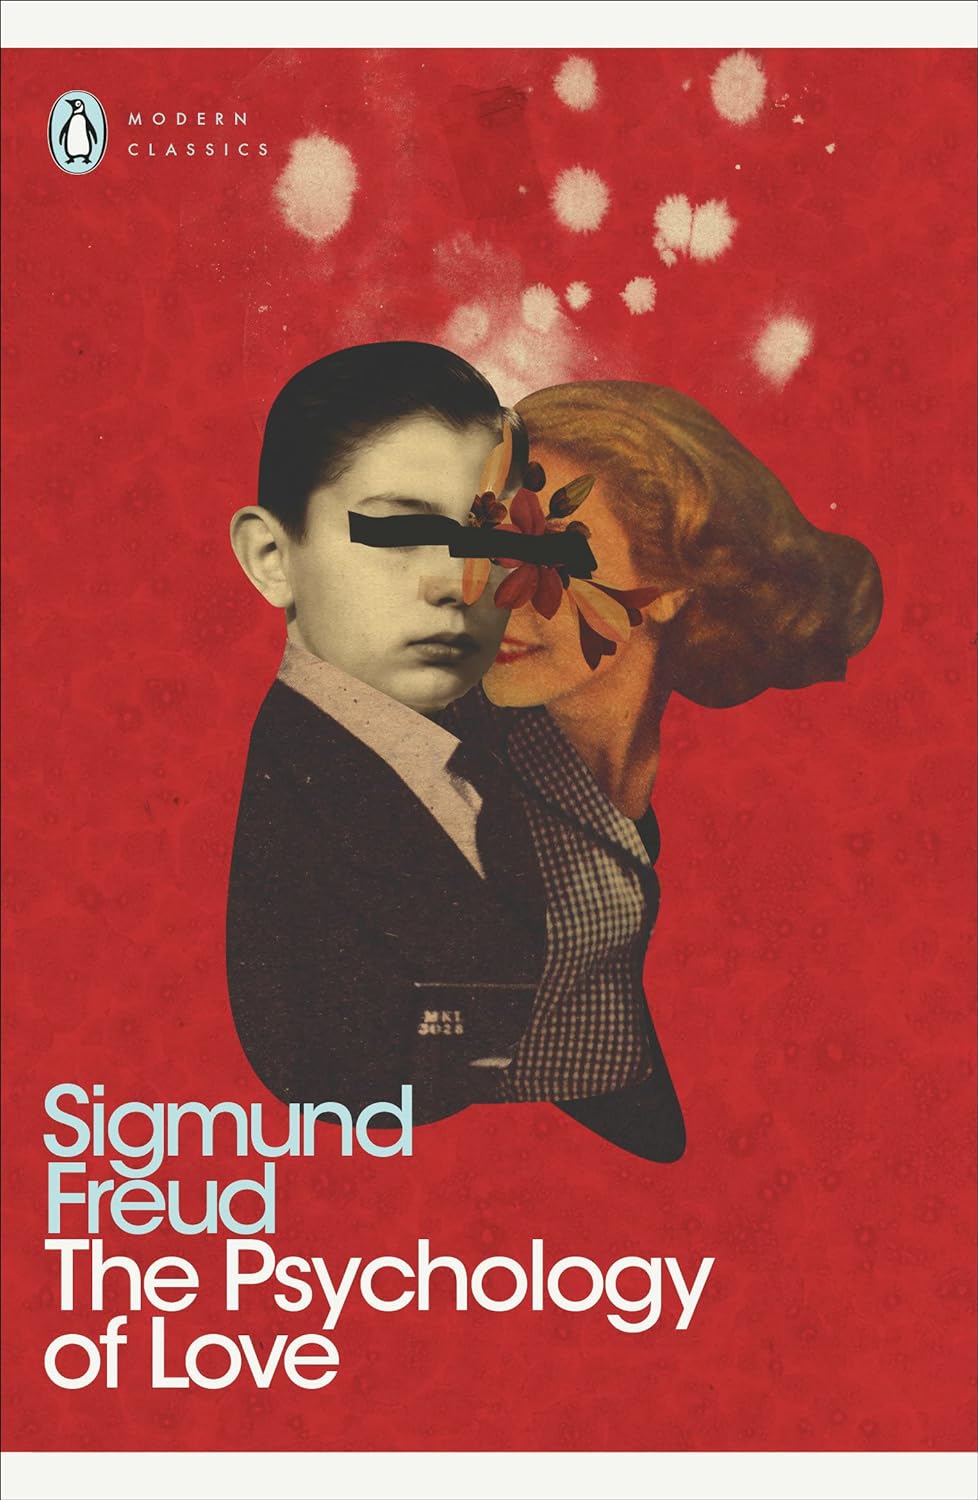 The Psychology of Love by Sigmund Freud